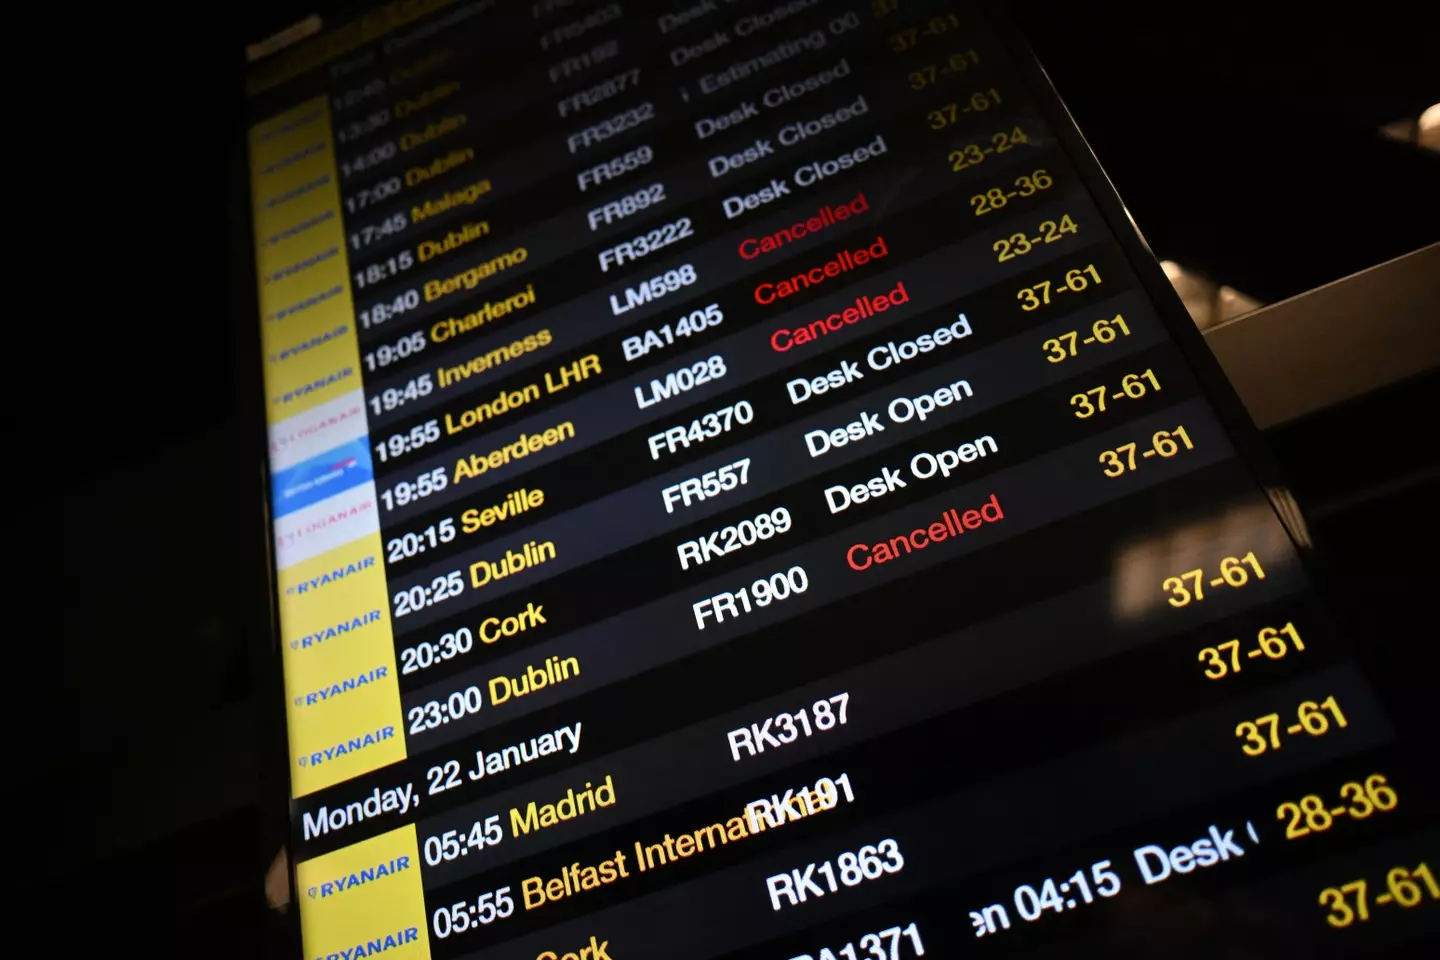 Flight board at Manchester Airport (PAUL ELLIS/AFP via Getty Images)